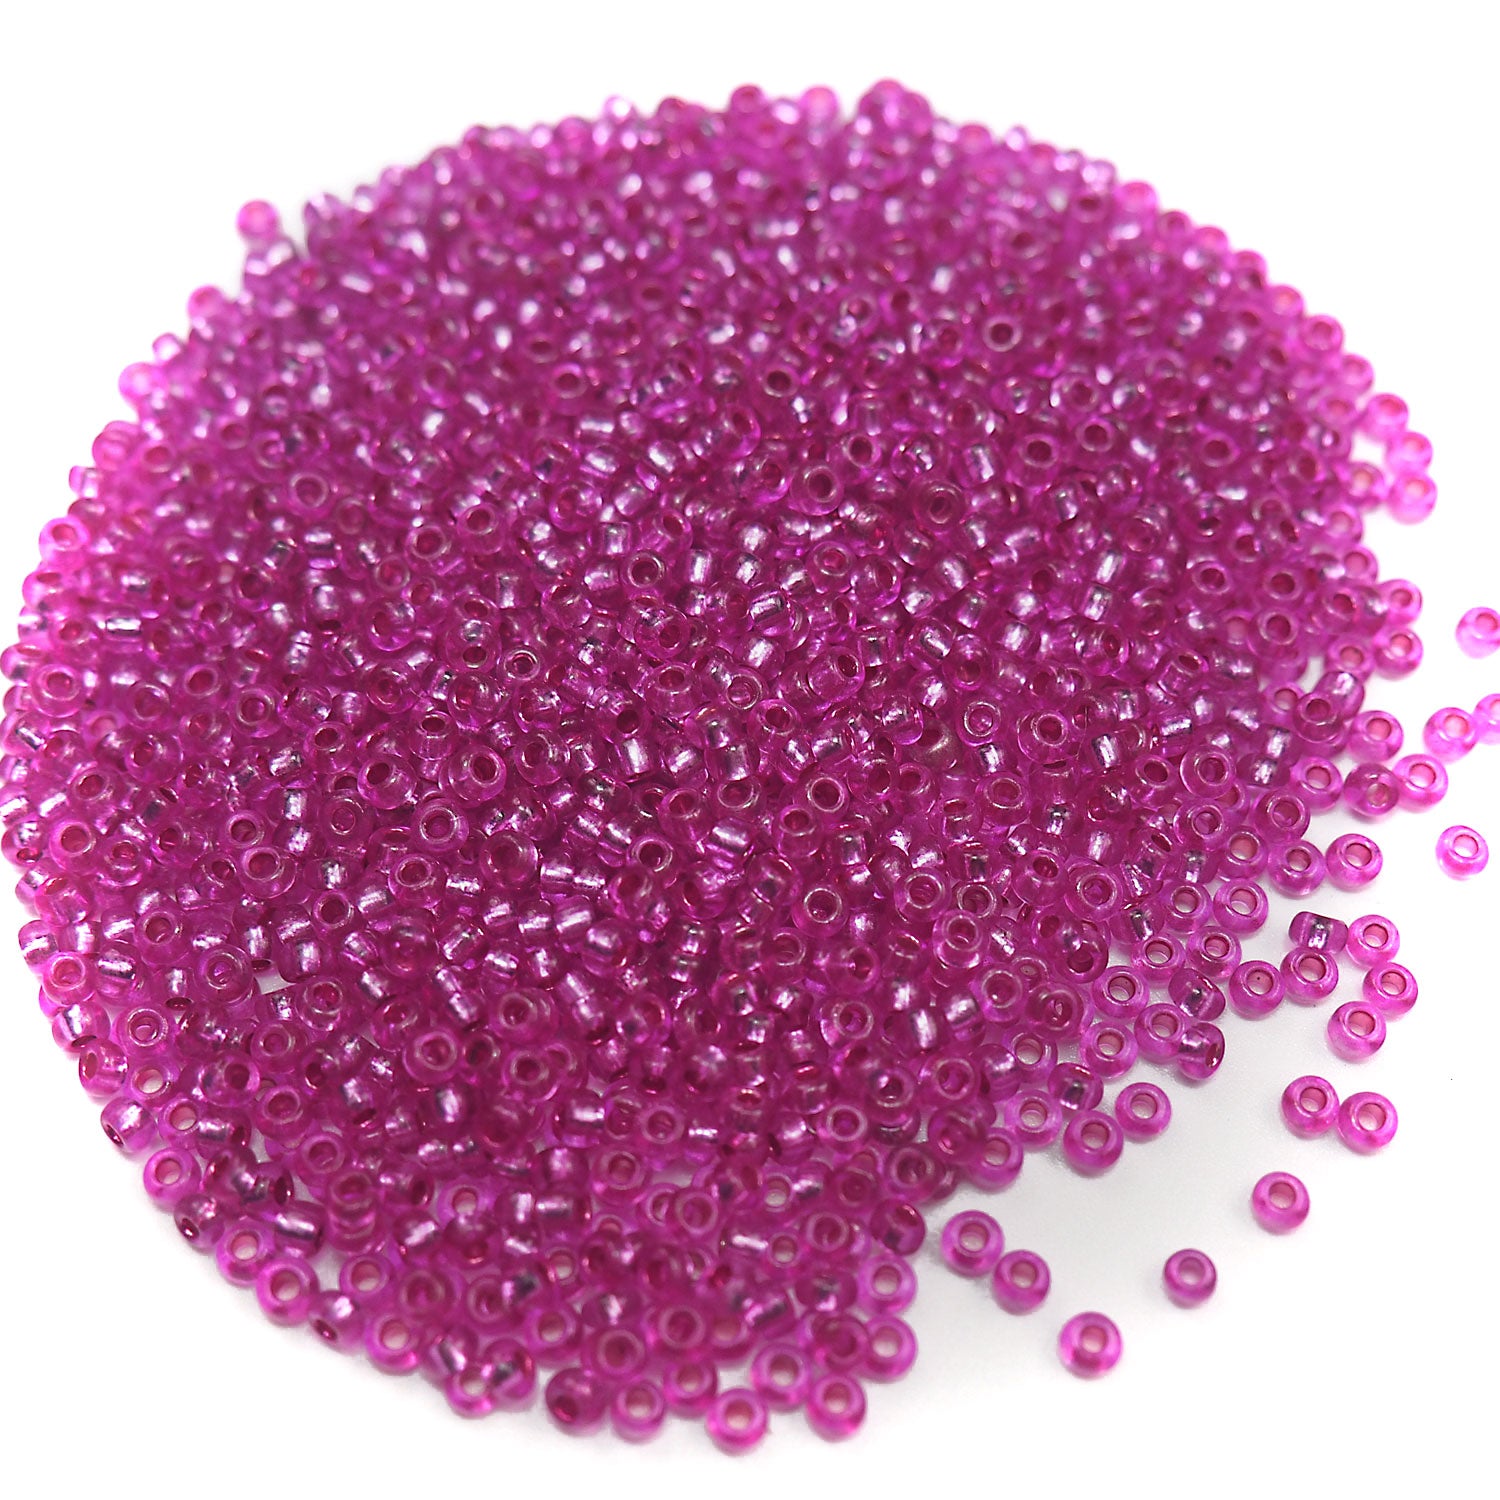 Rocailles size 9/0 (2.6mm) Mauve Pink Silver Lined, Preciosa Ornela Traditional Czech Glass Seed Beads, 30grams (1 oz), P930